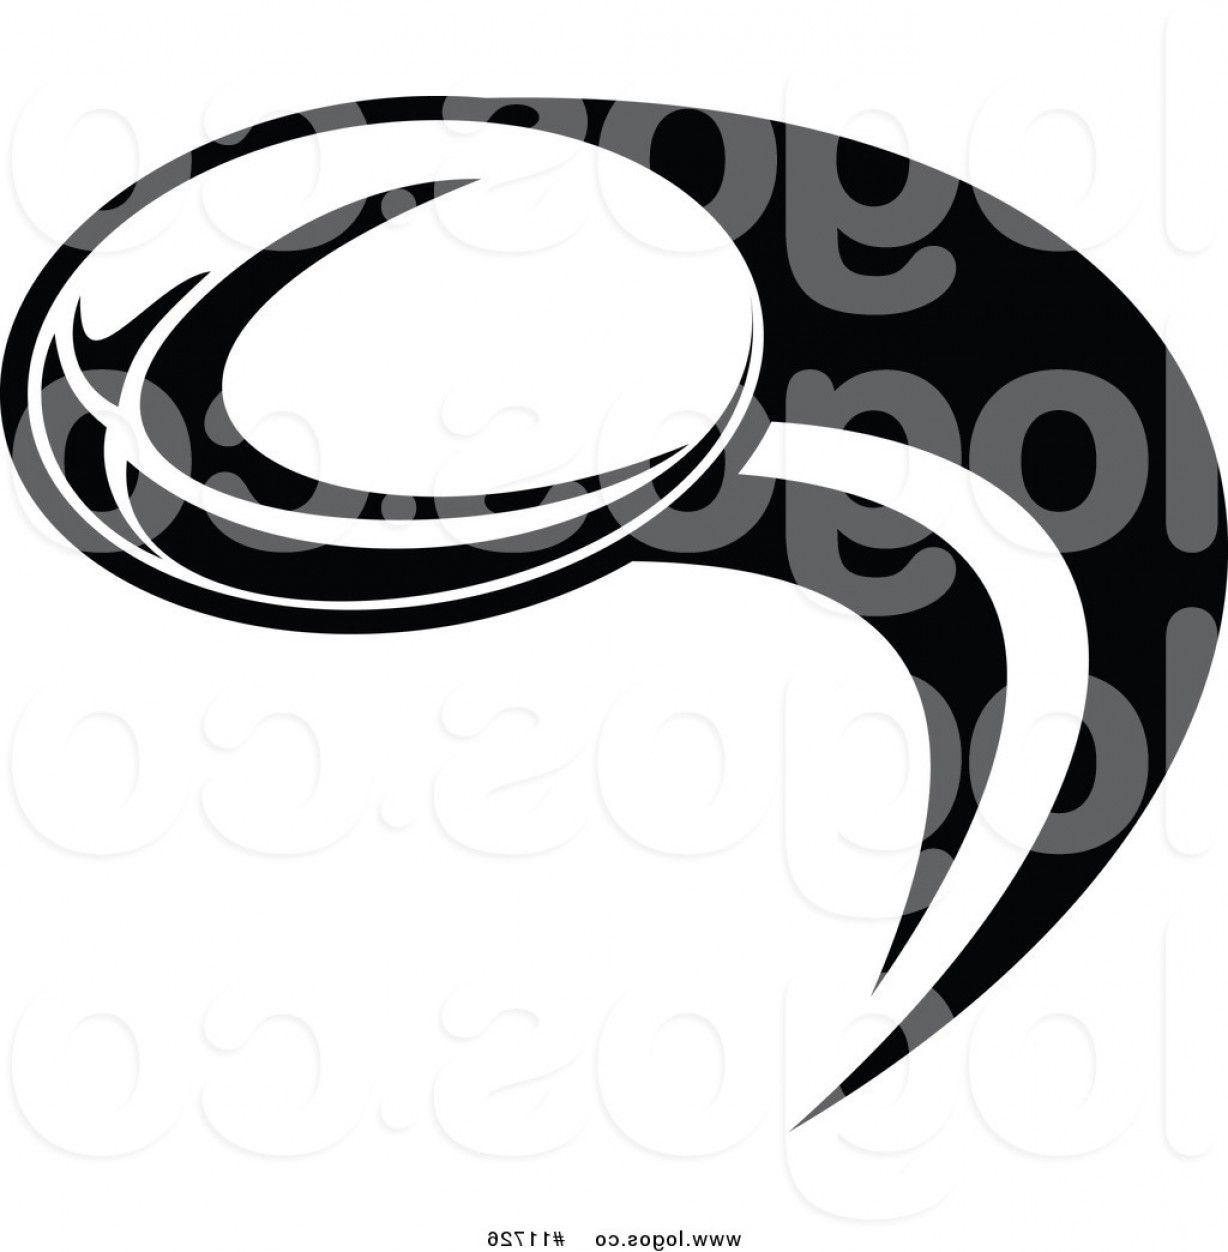 Black Swoosh Logo - Royalty Free Vector Of A Black And White Rugby Ball Swoosh Logo By ...